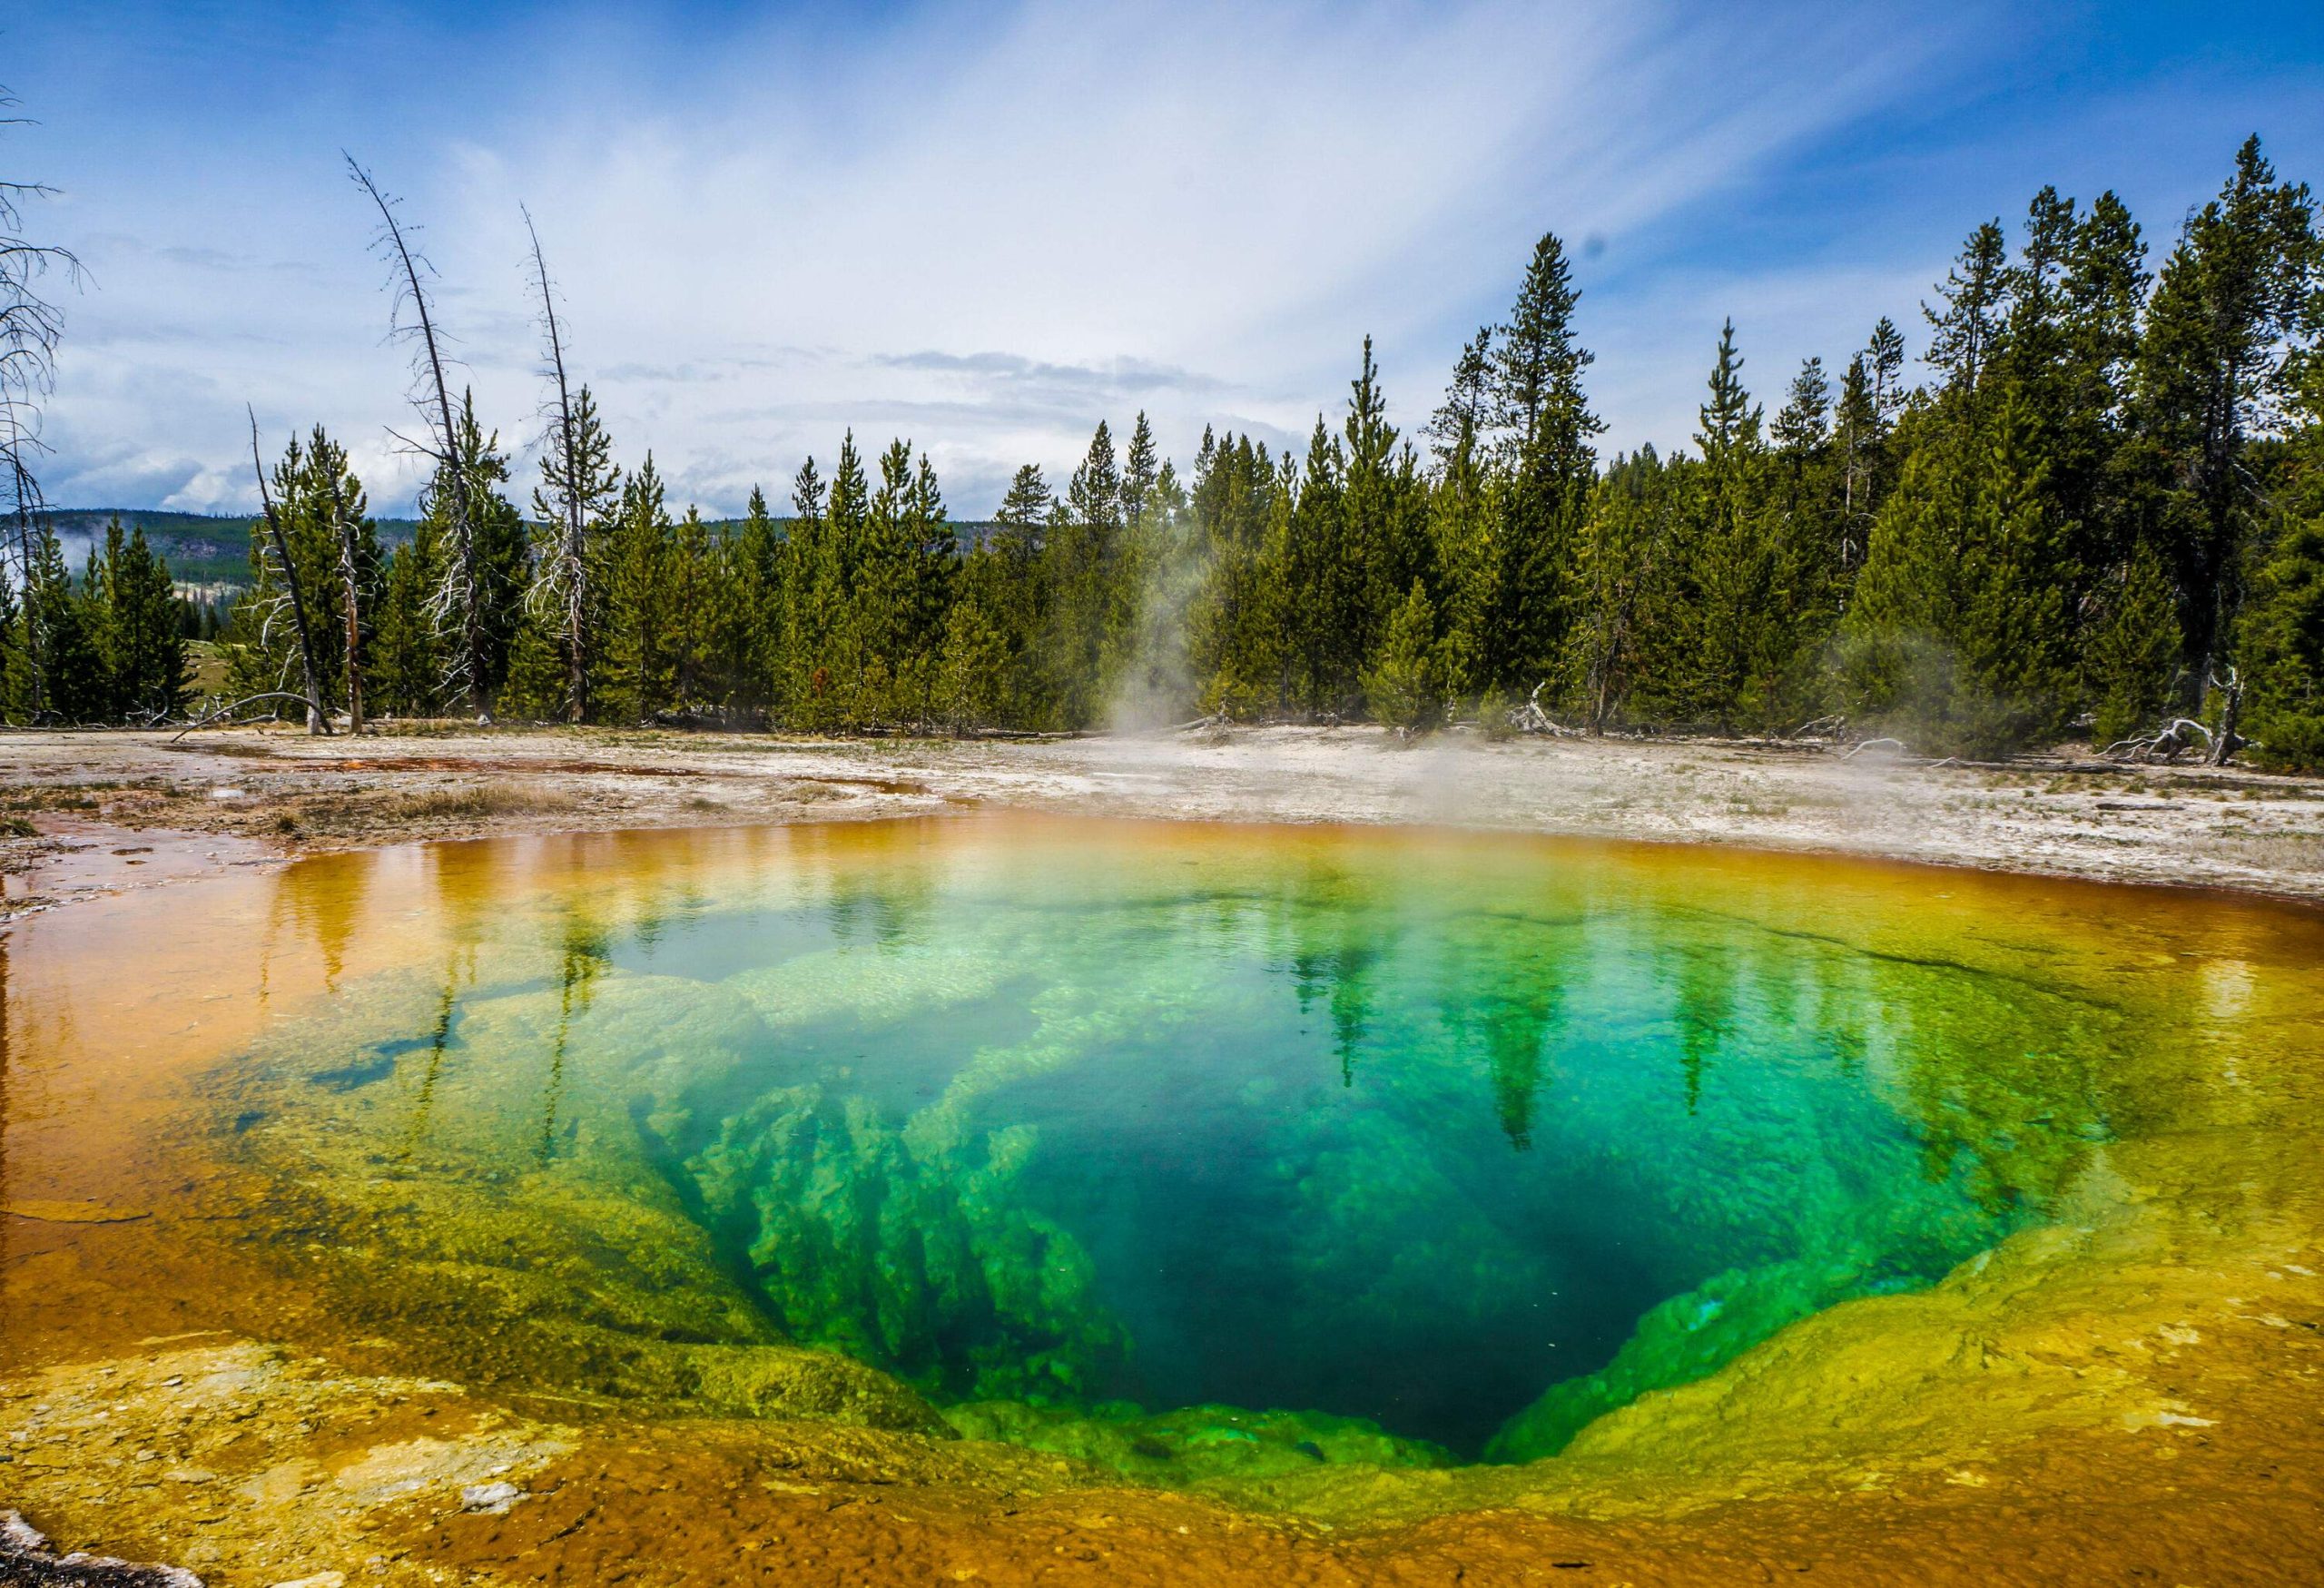 A hot spring with a yellow rim and a green center emitting thin smoke.